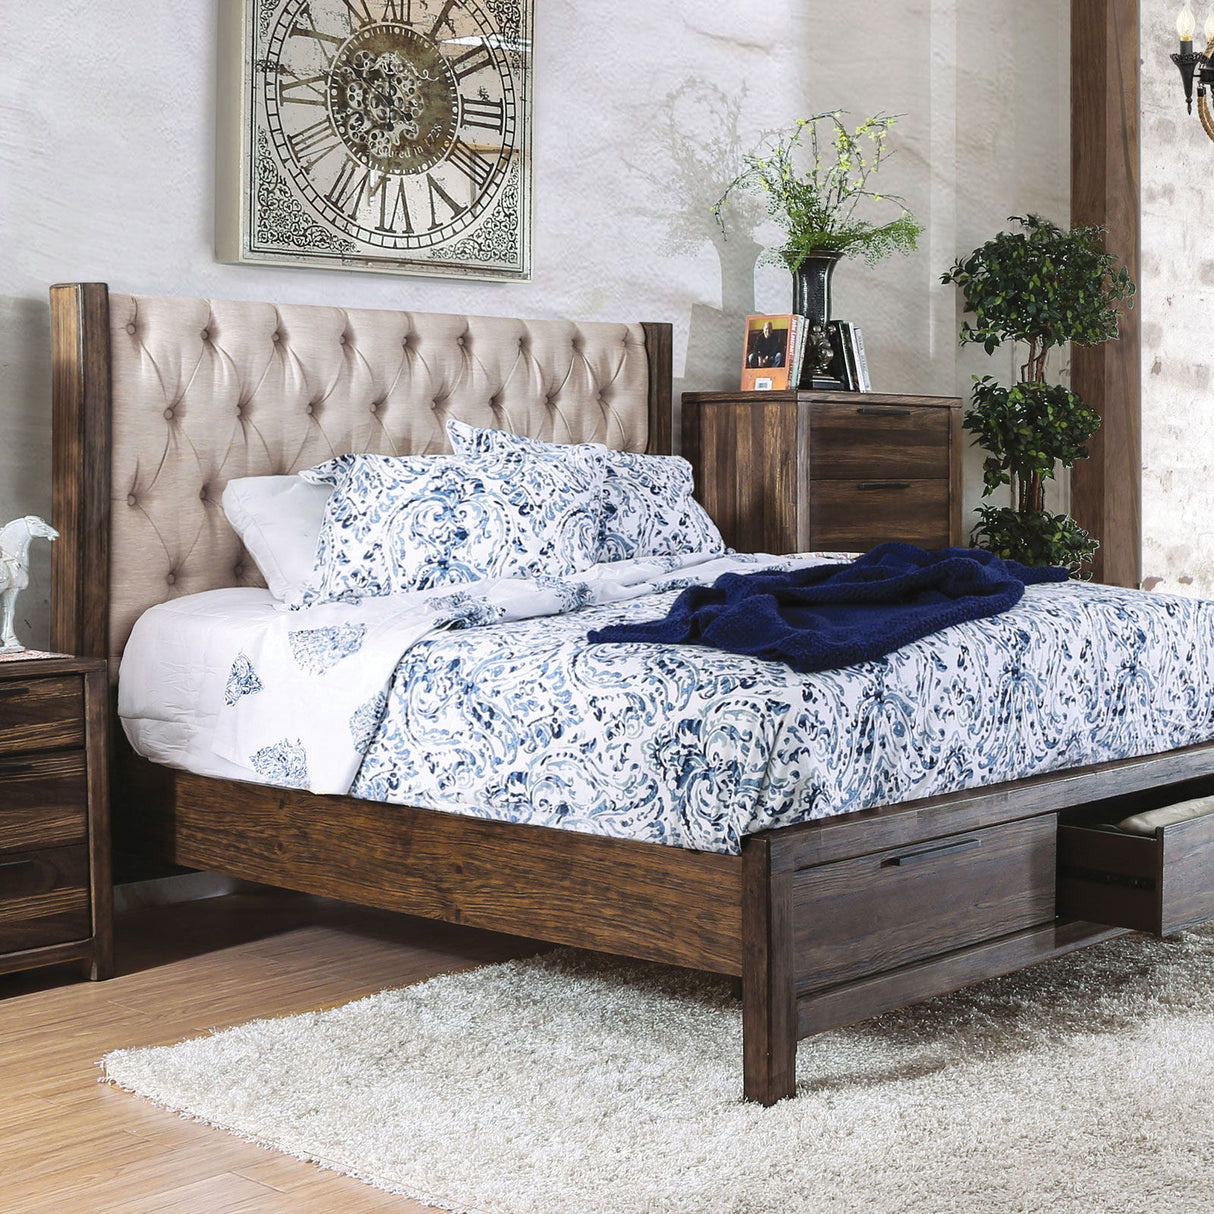 Hutchinson - Queen Bed With Drawers - Rustic Natural Tone / Beige